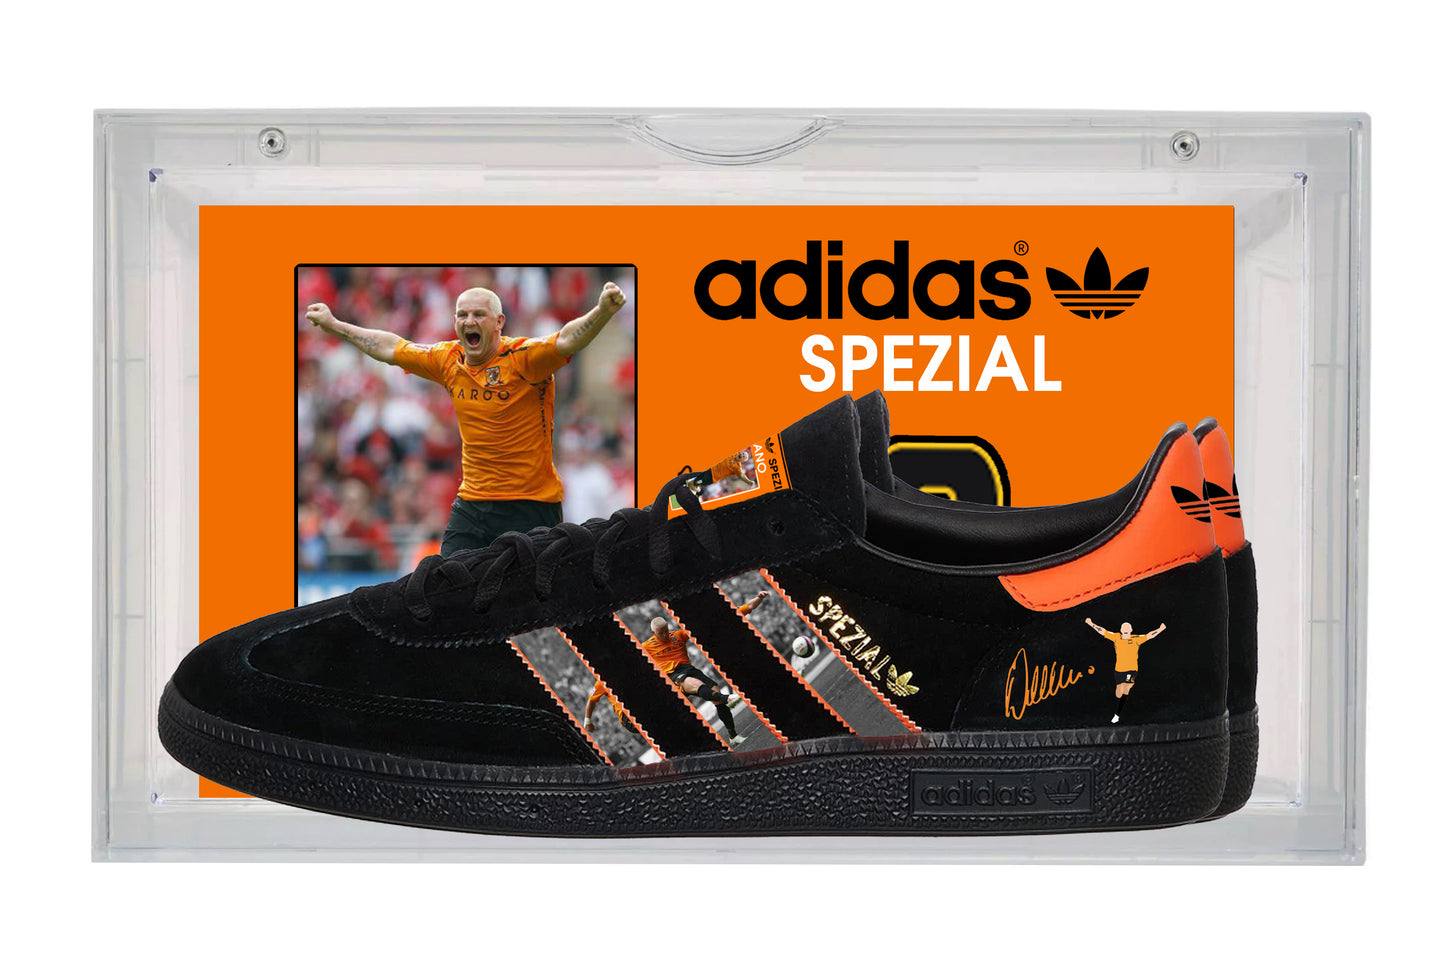 Limited edition Hull City FC Dean Windass inspired black / orange suede Adidas Handball Spezial trainers / sneakers